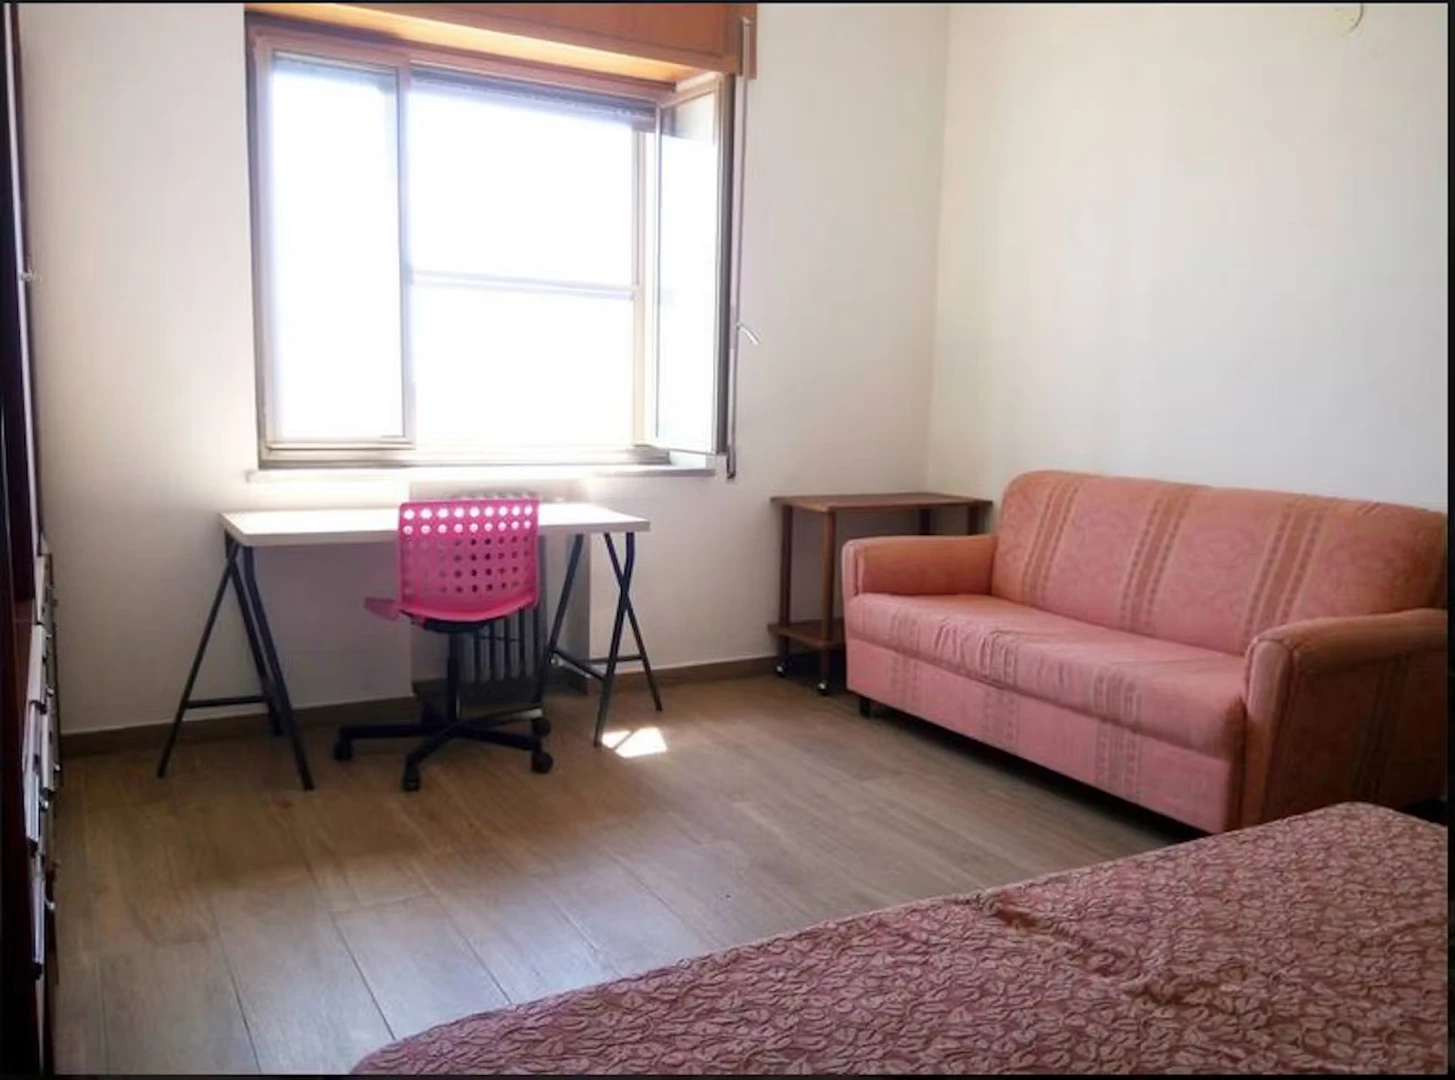 Room for rent with double bed Catanzaro